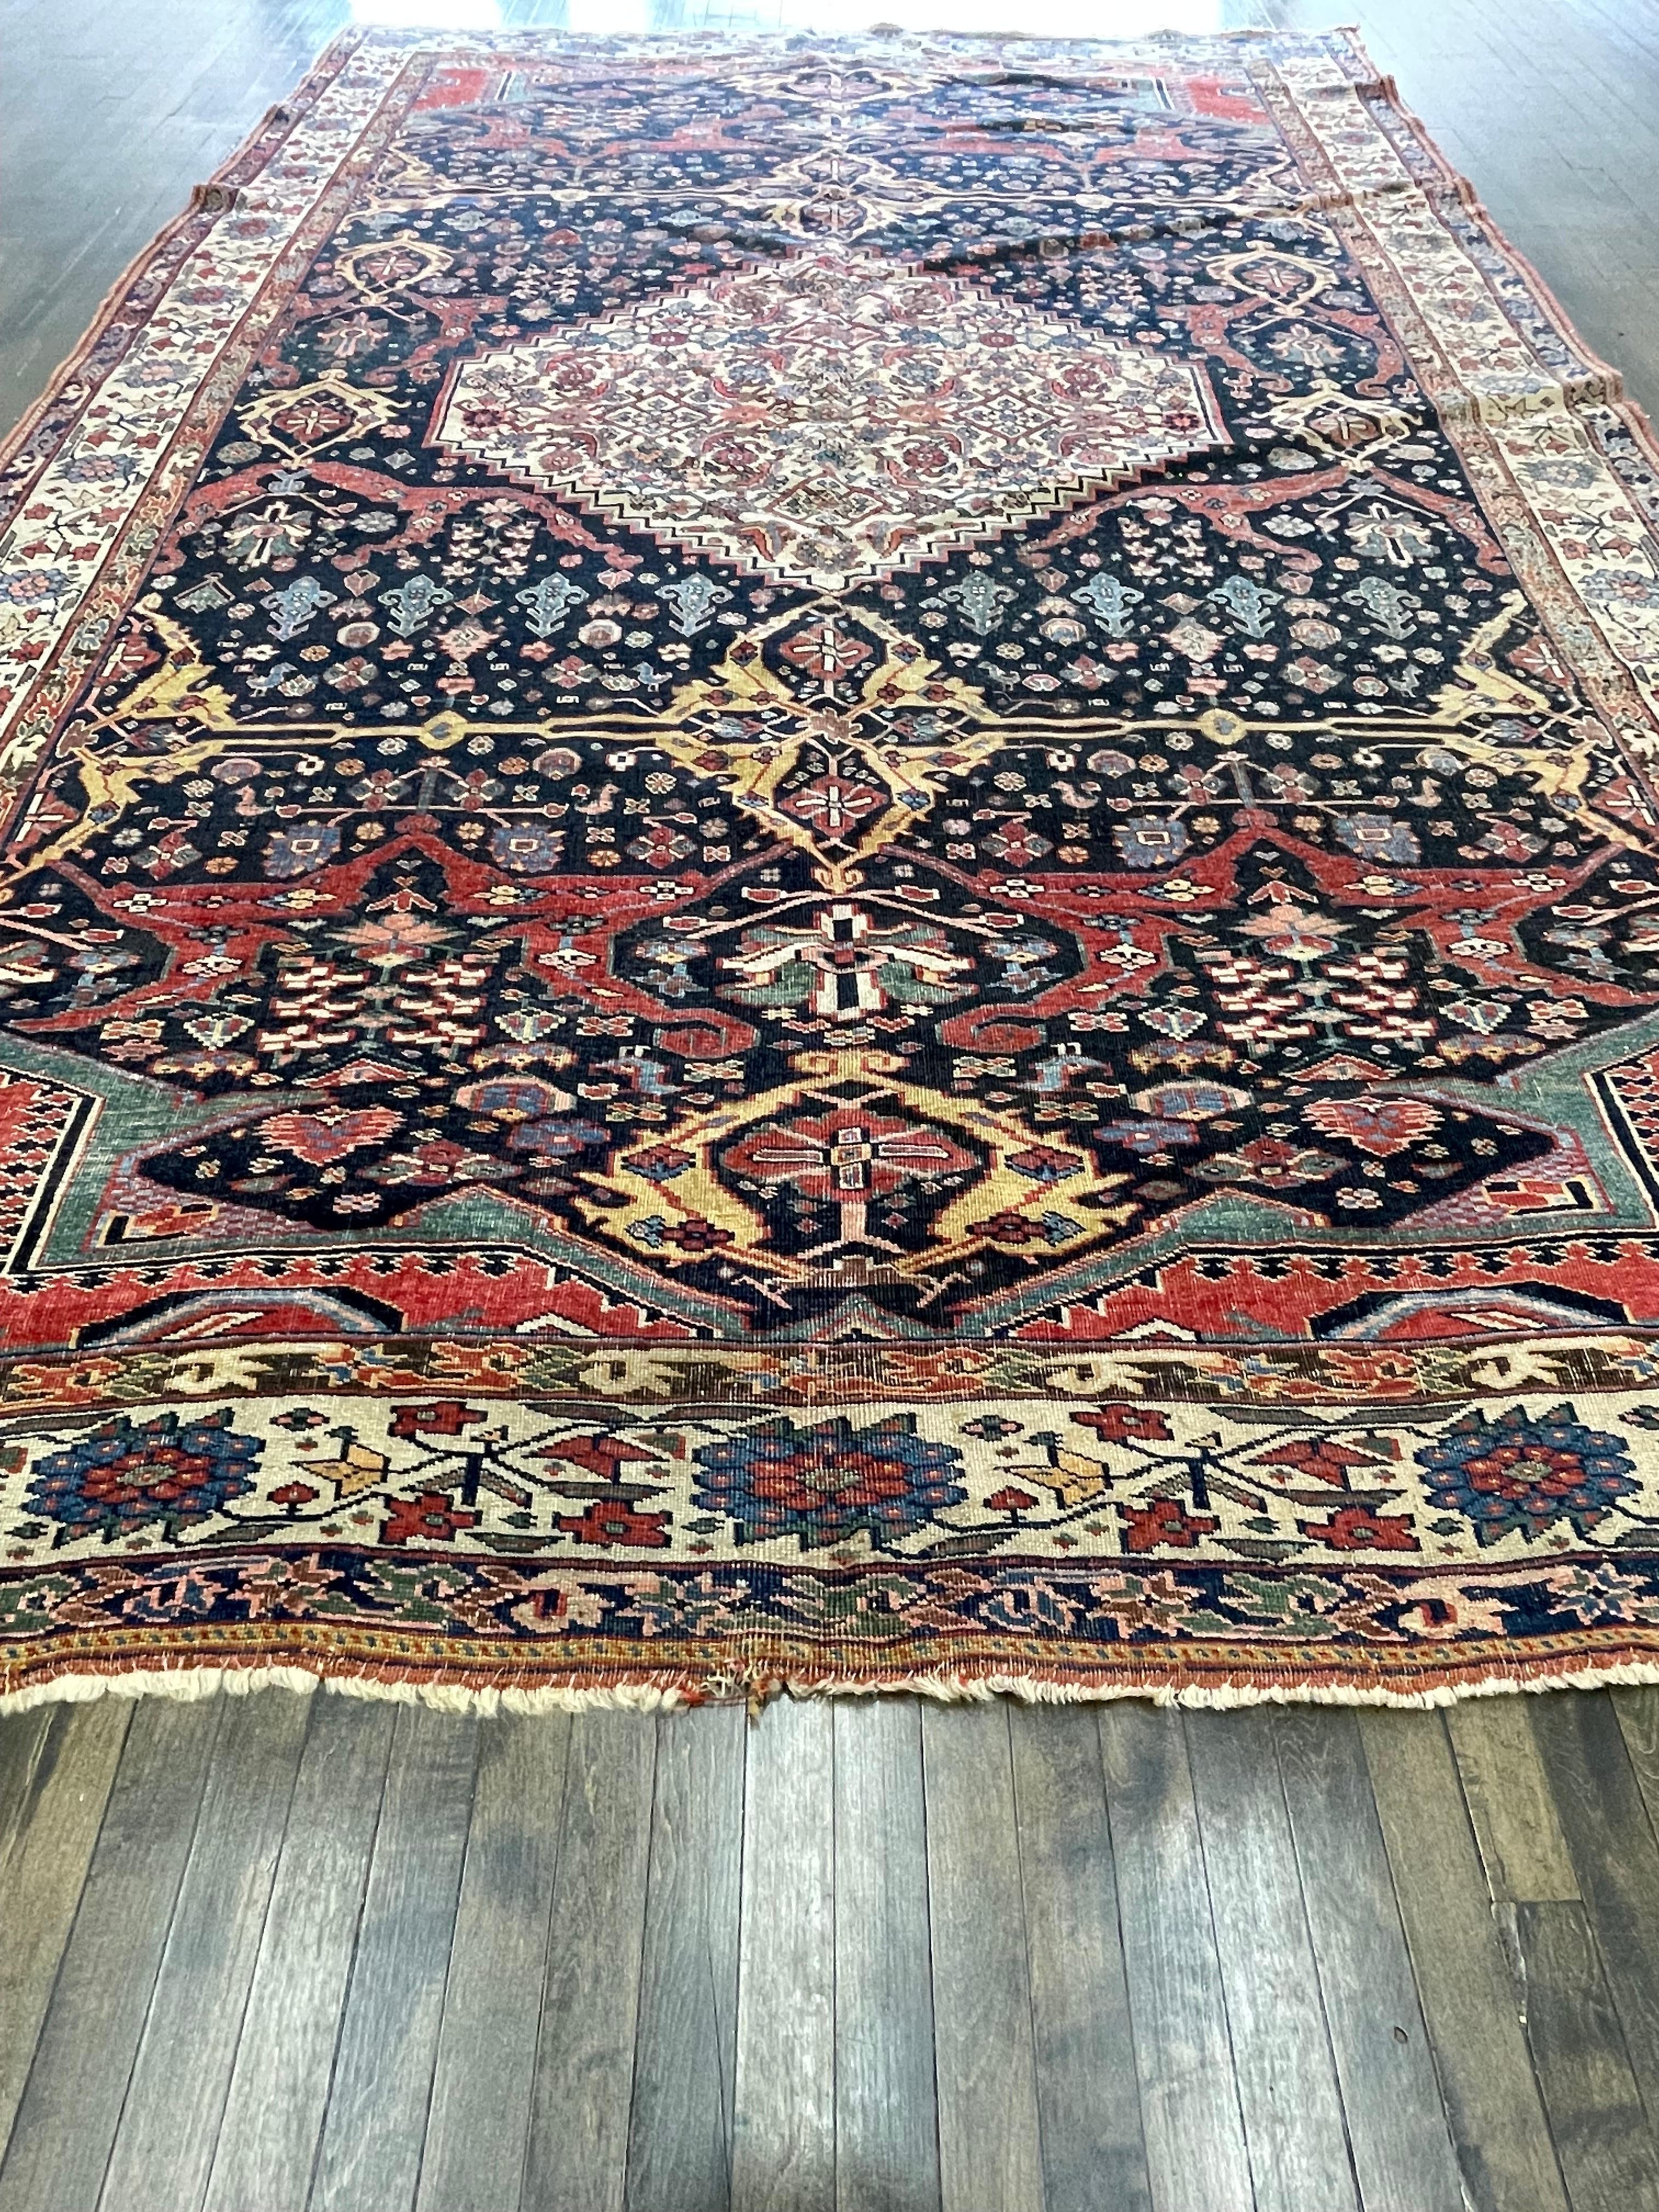 A beautiful example of much sought after Garrus design Bidjar carpet, this rug is handwoven in the town of Bijar located western Iran. Made with high quality wool both for the foundation and pile the rug has a center ivory medallion sitting on all